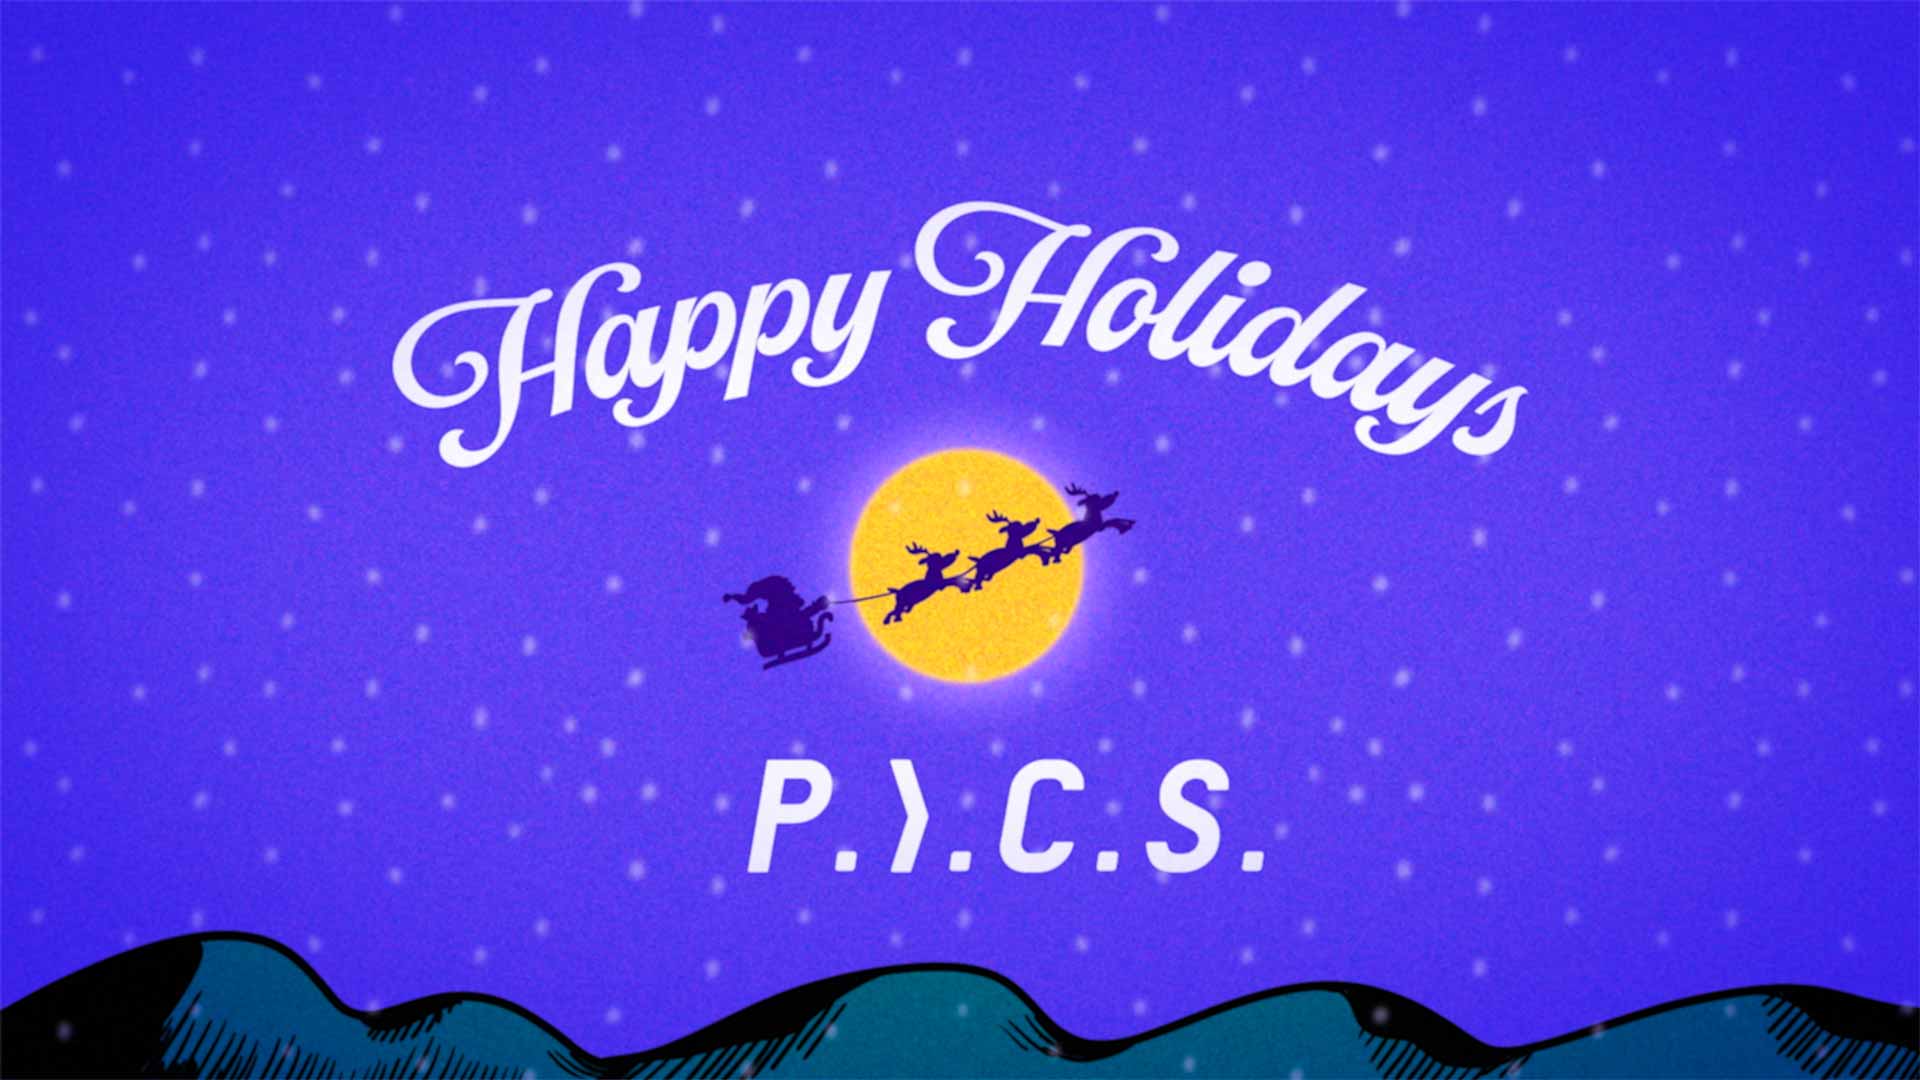 Greetings from P.I.C.S.